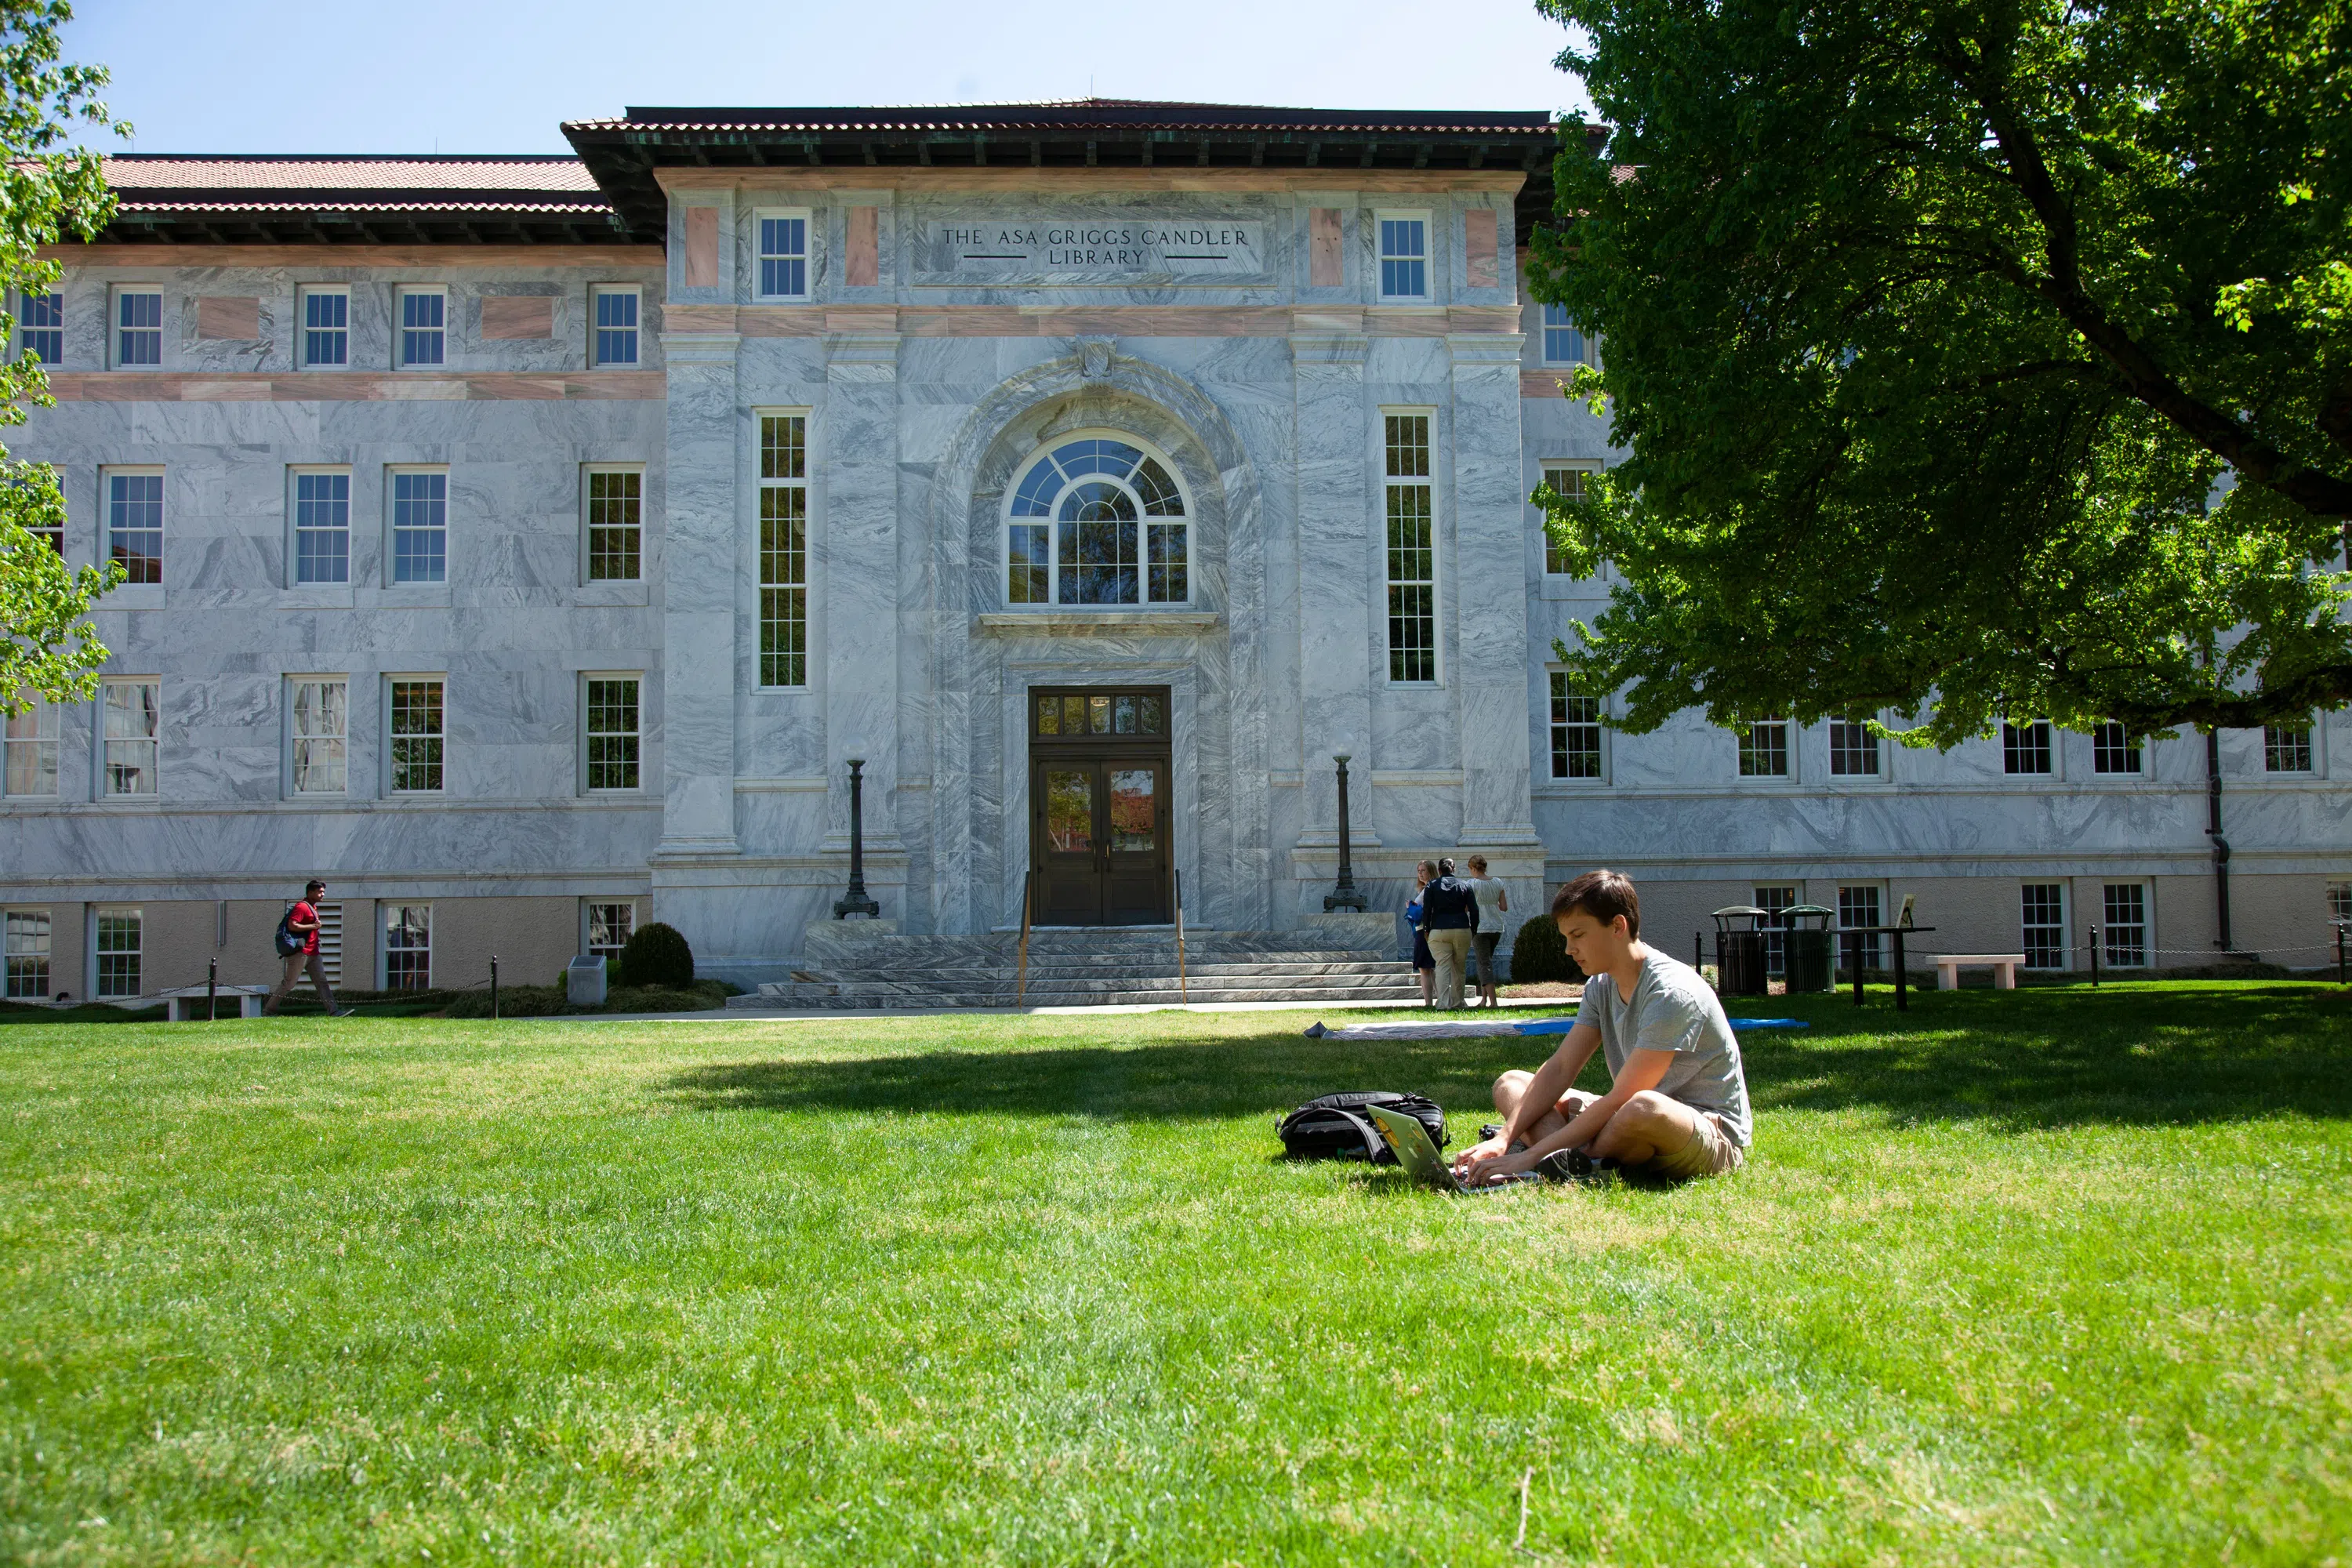 Directly across the Quad from the Administration Building is one of the most photogenic spots on campus- the Candler Library